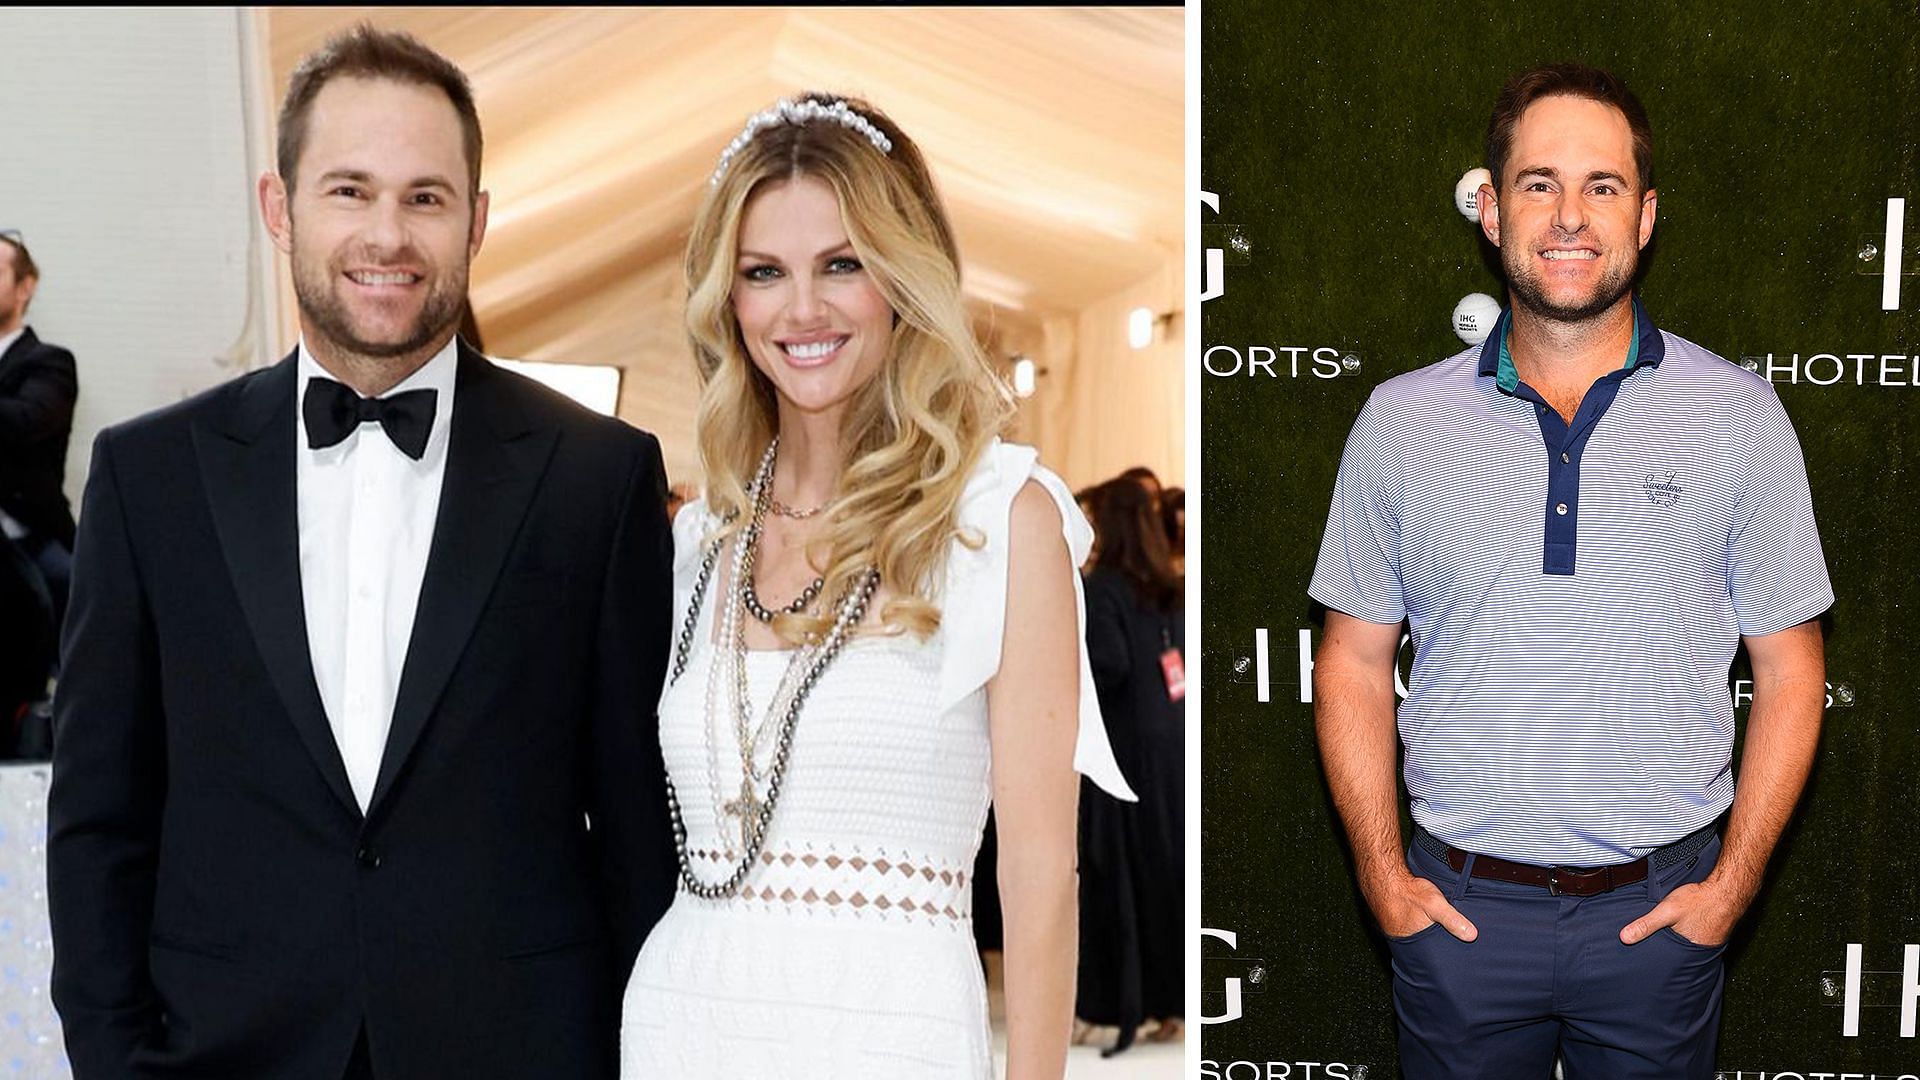 In Pictures: Andy Roddick's wife Brooklyn Decker shares hilarious glimpses of their 